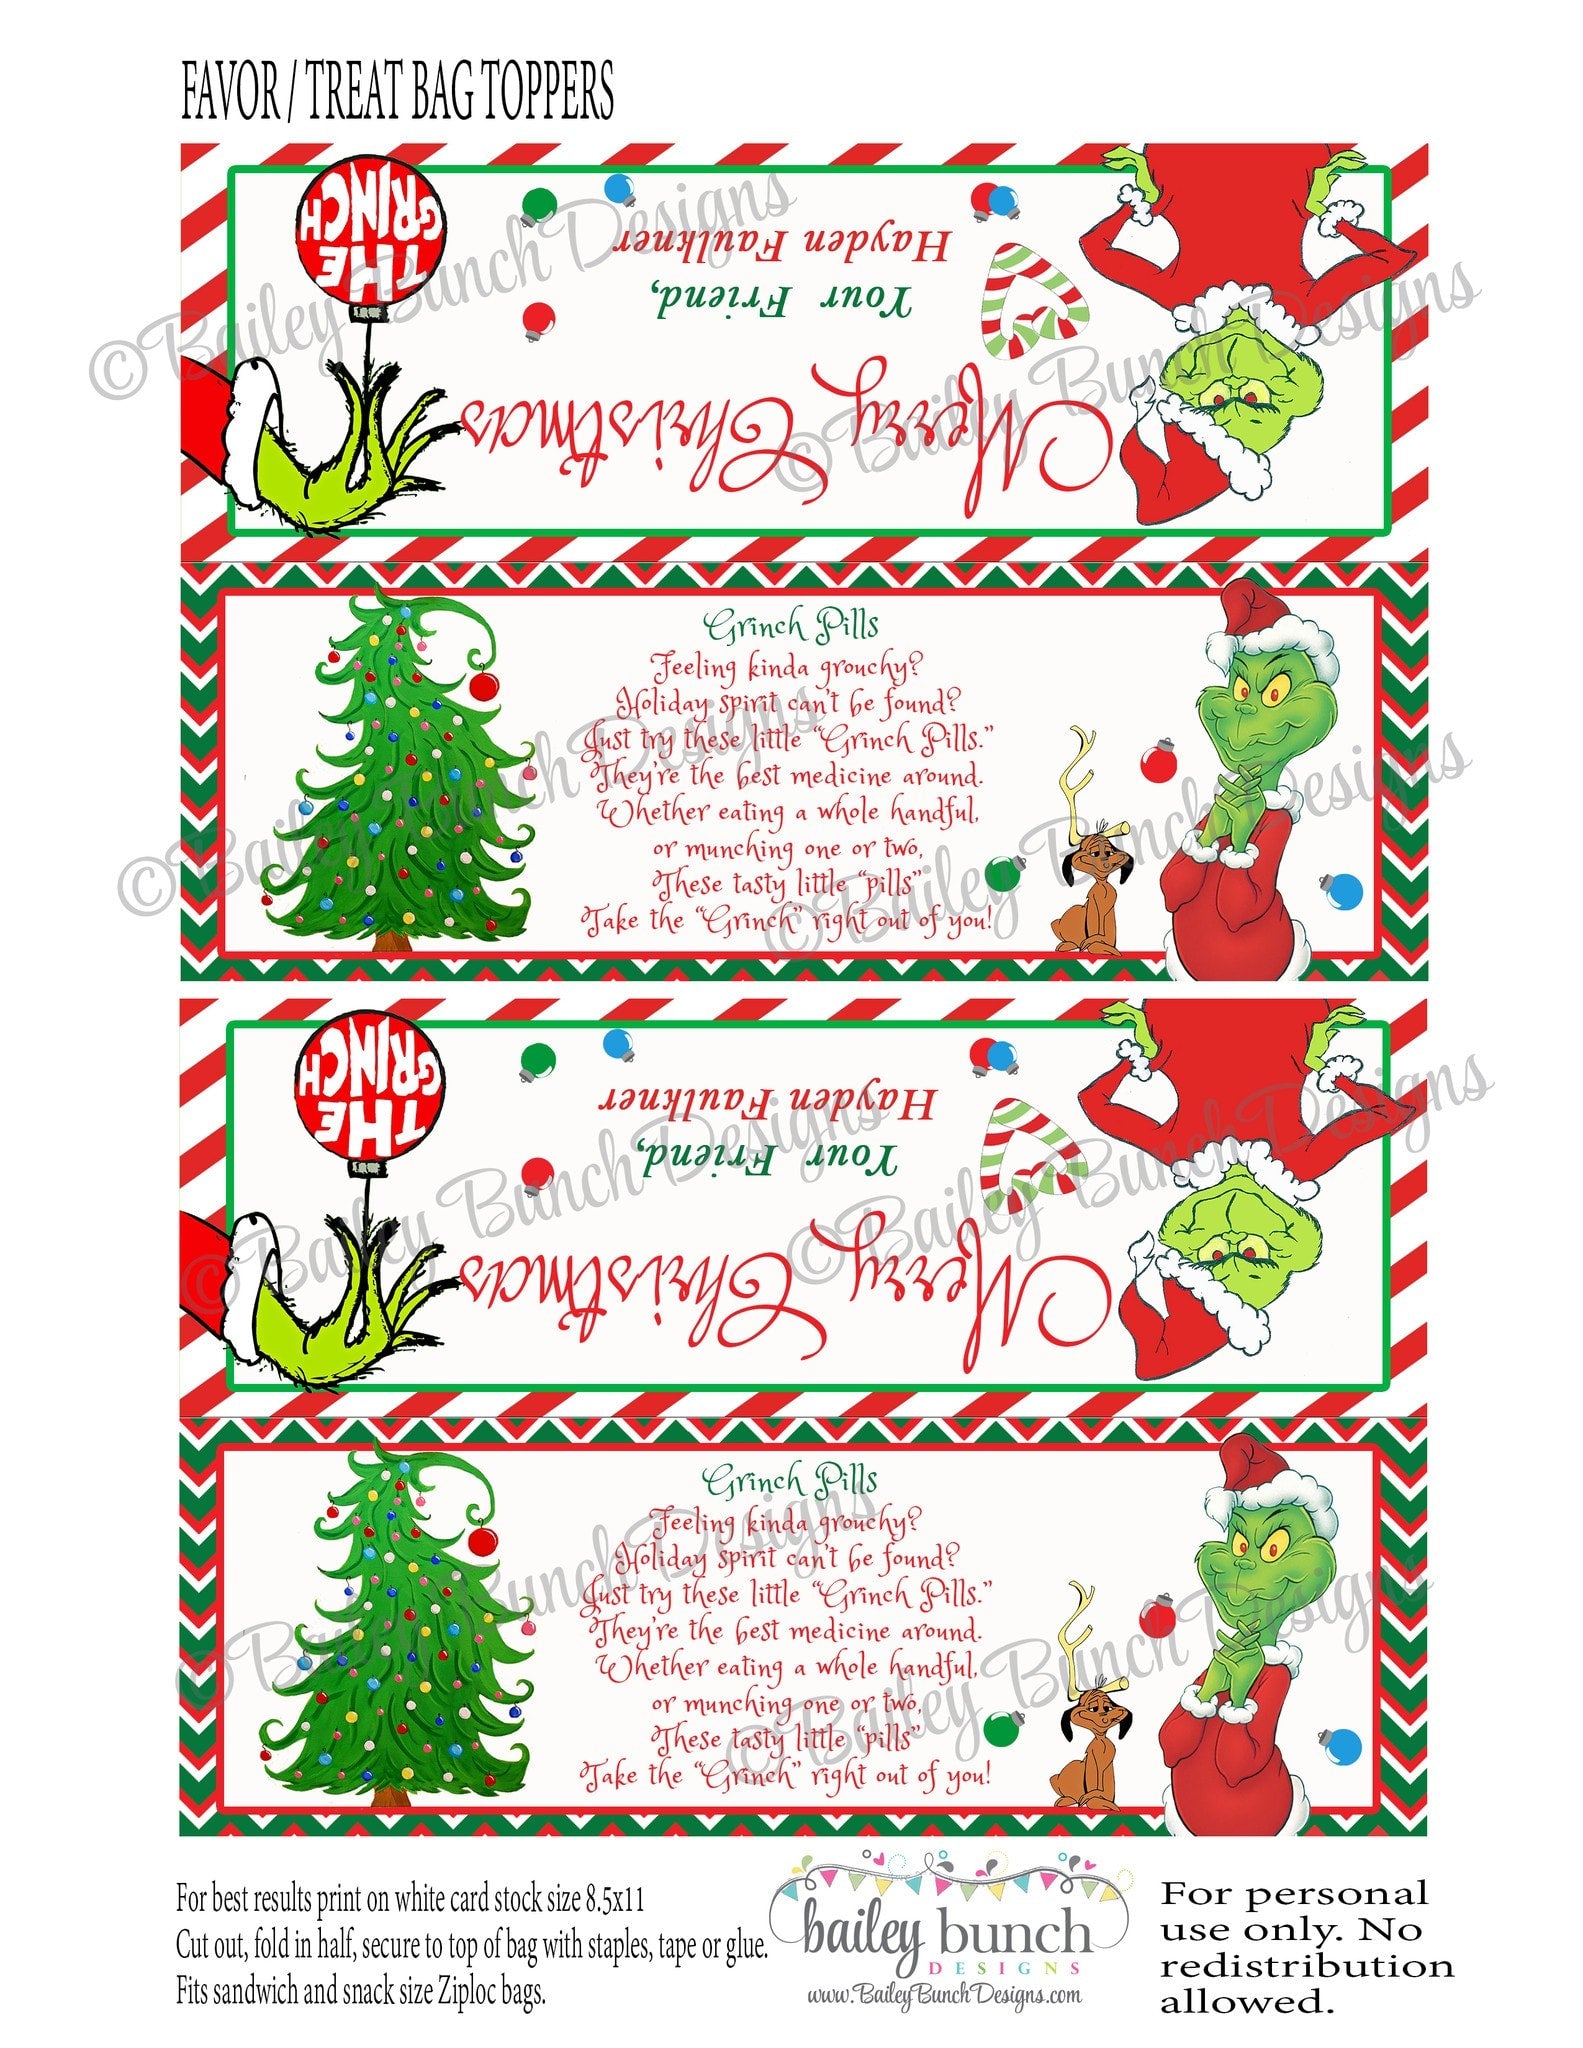 Grinch Pills Treat Bags Christmas Toppers IDGRINCH0520 Bailey Bunch Designs